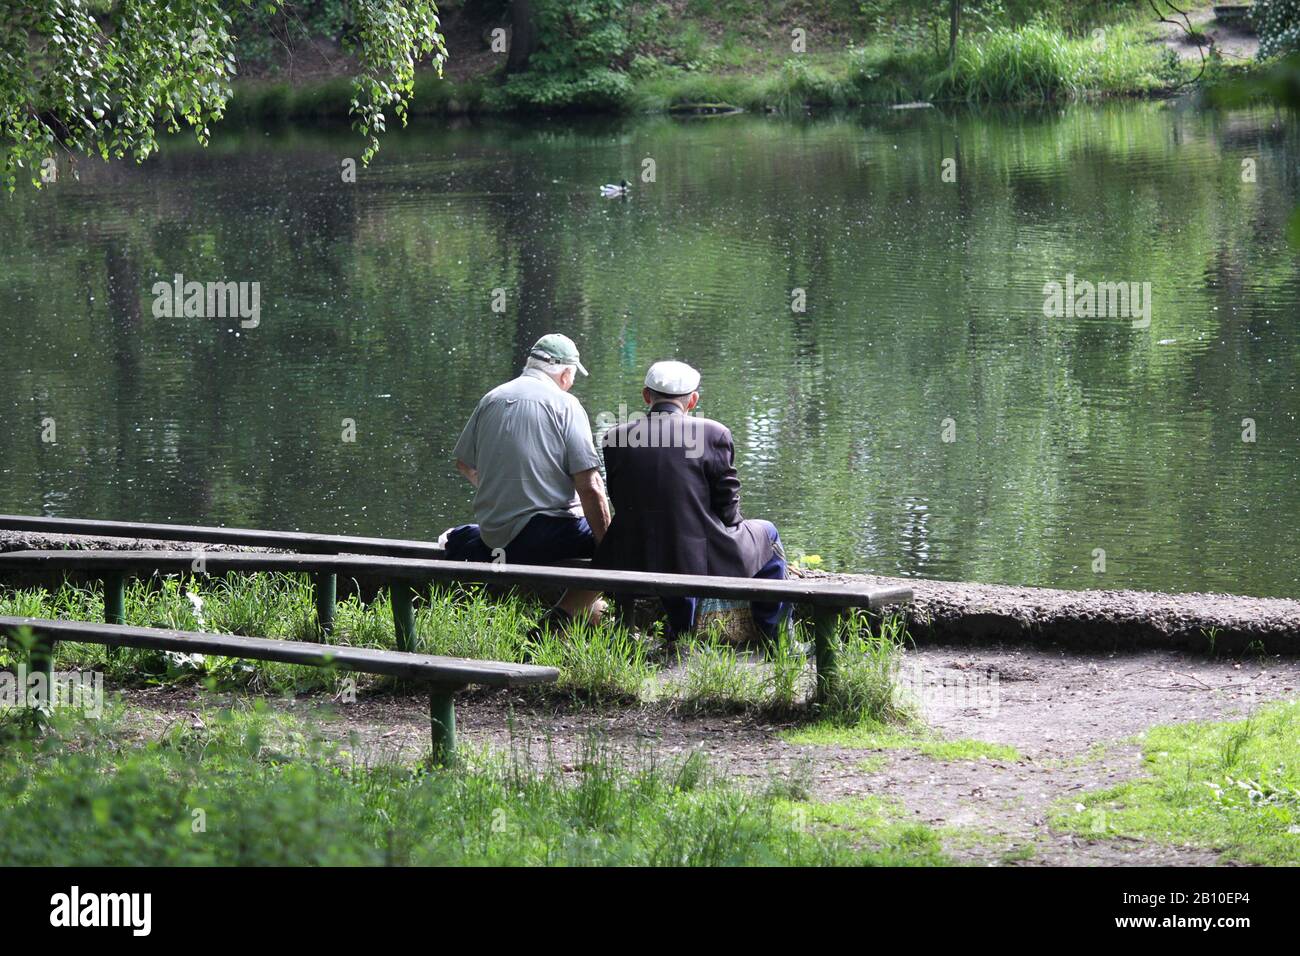 Two elderly men on a bench near a pond. People Stock Photo